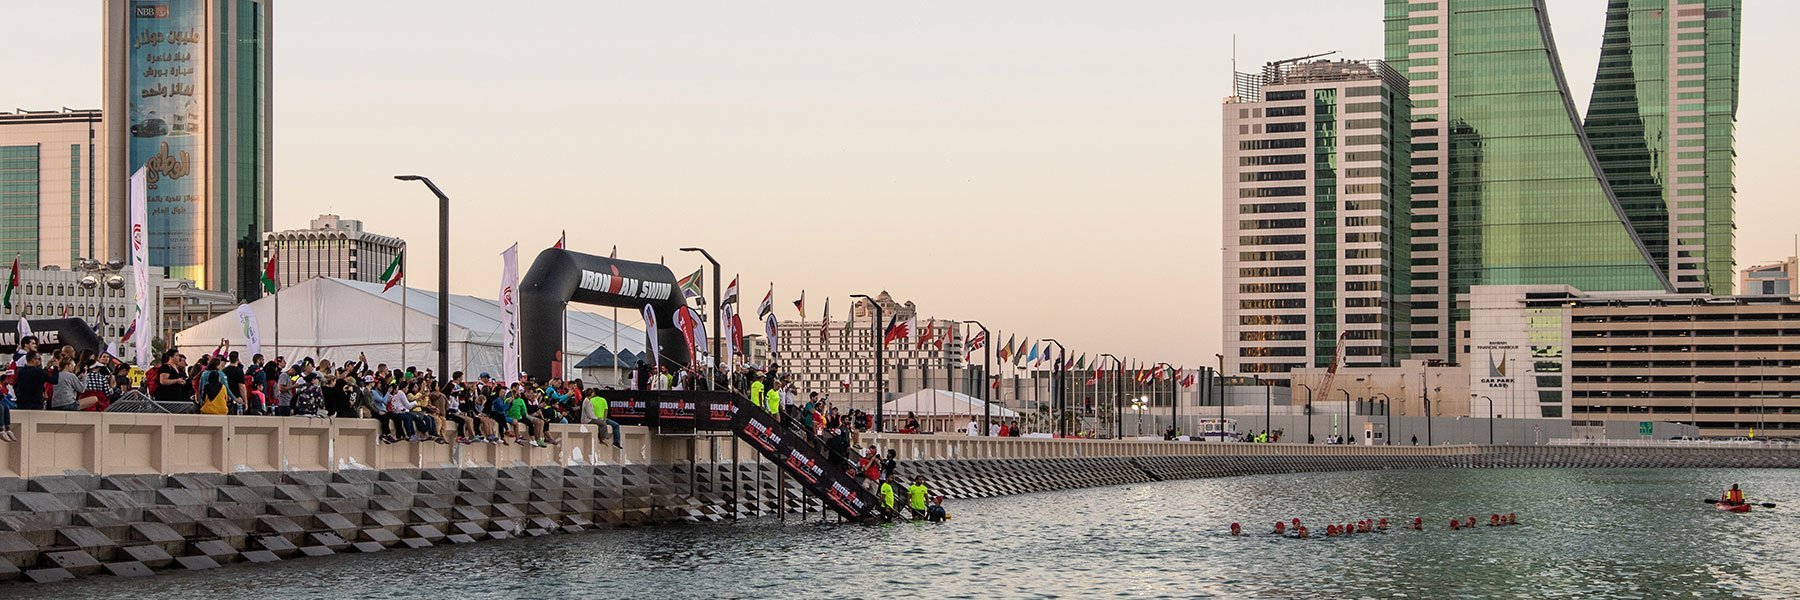 IRONMAN 70.3 Bahrain athletes are in the water in front of "The Avenues" in Manama and wait for the signal of the swim start, while people are watching